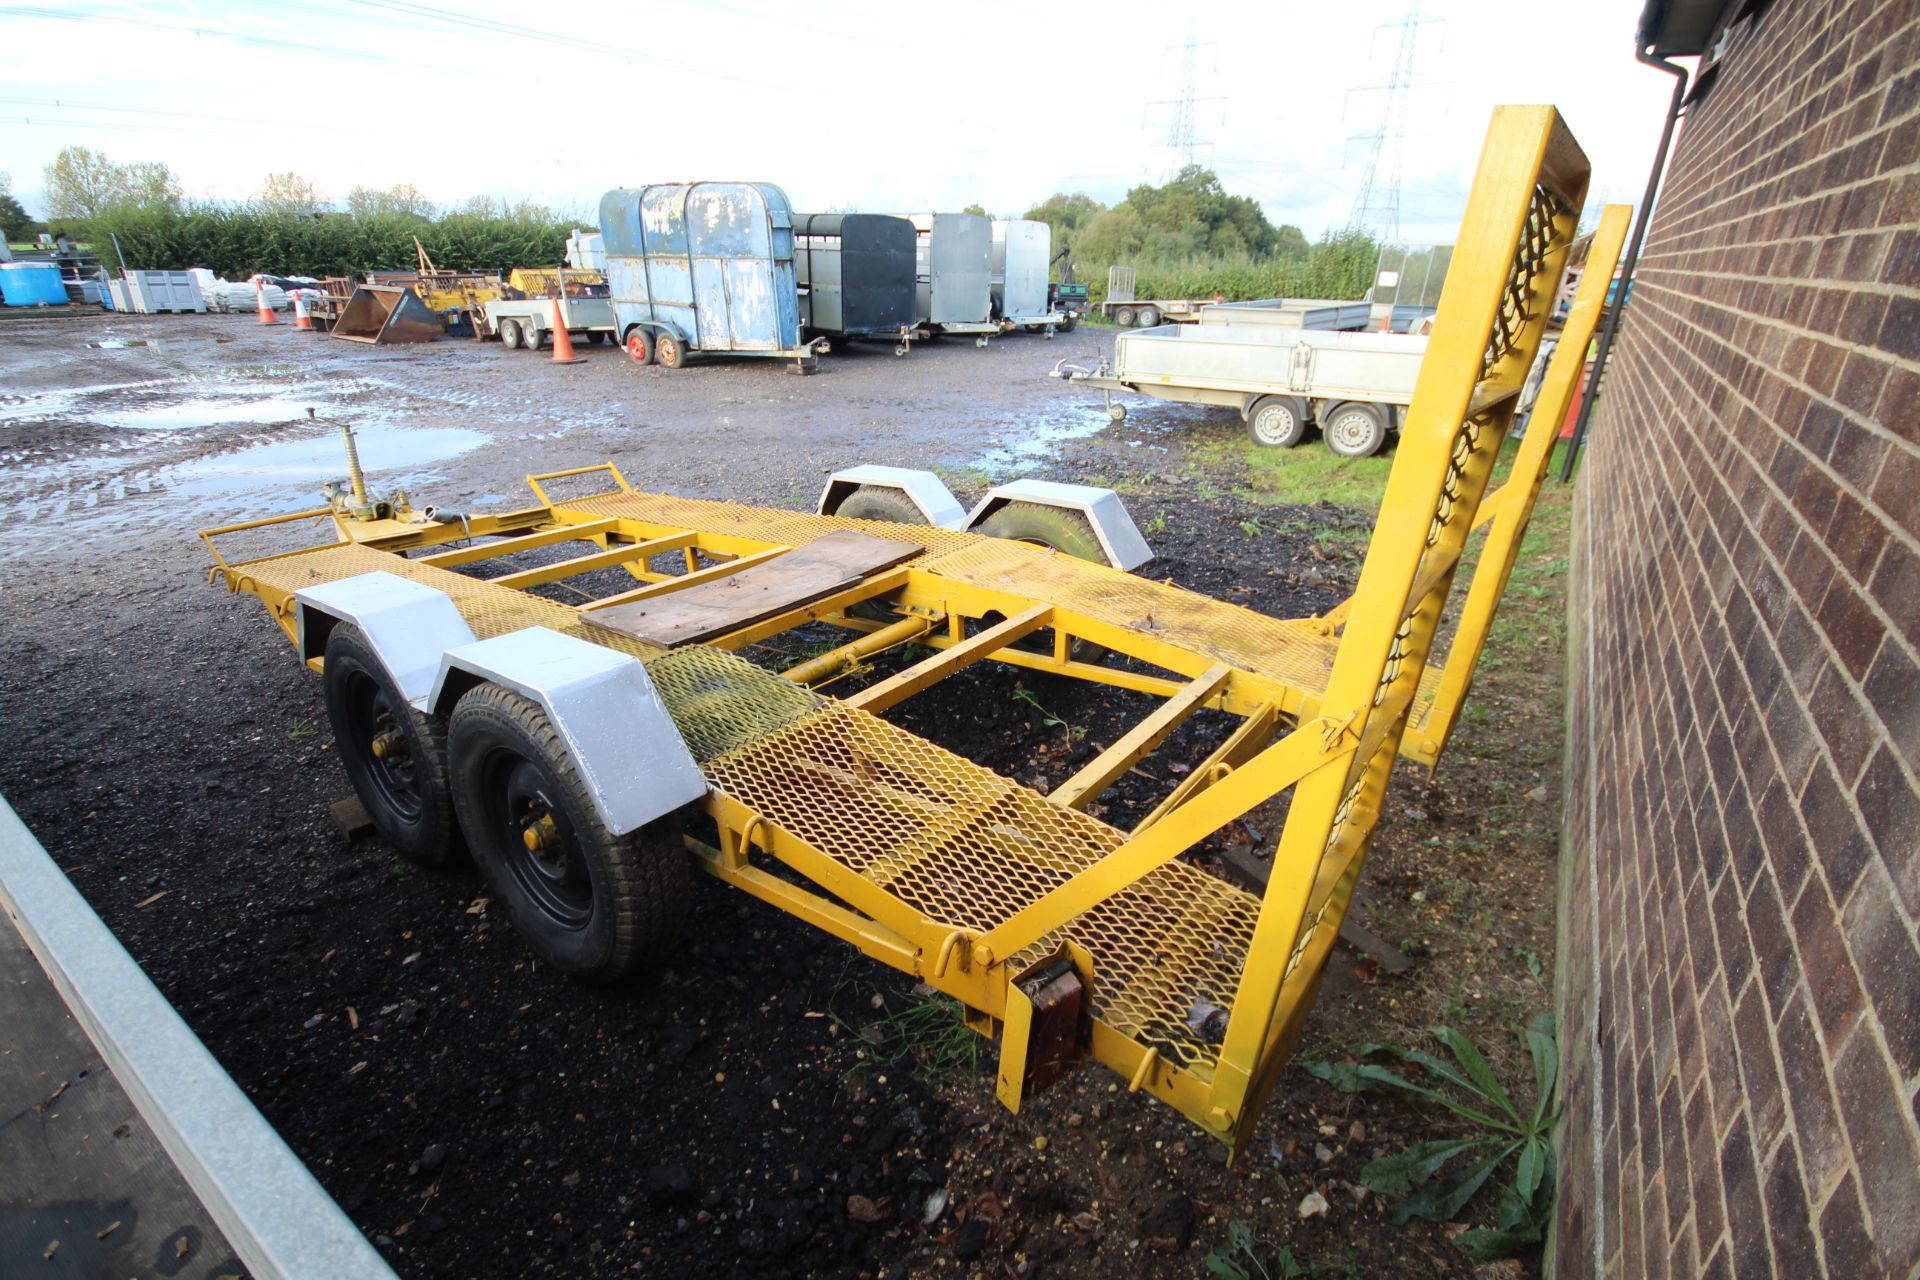 14ft x 6ft twin axle car transporter trailer. With ramps. - Image 3 of 15